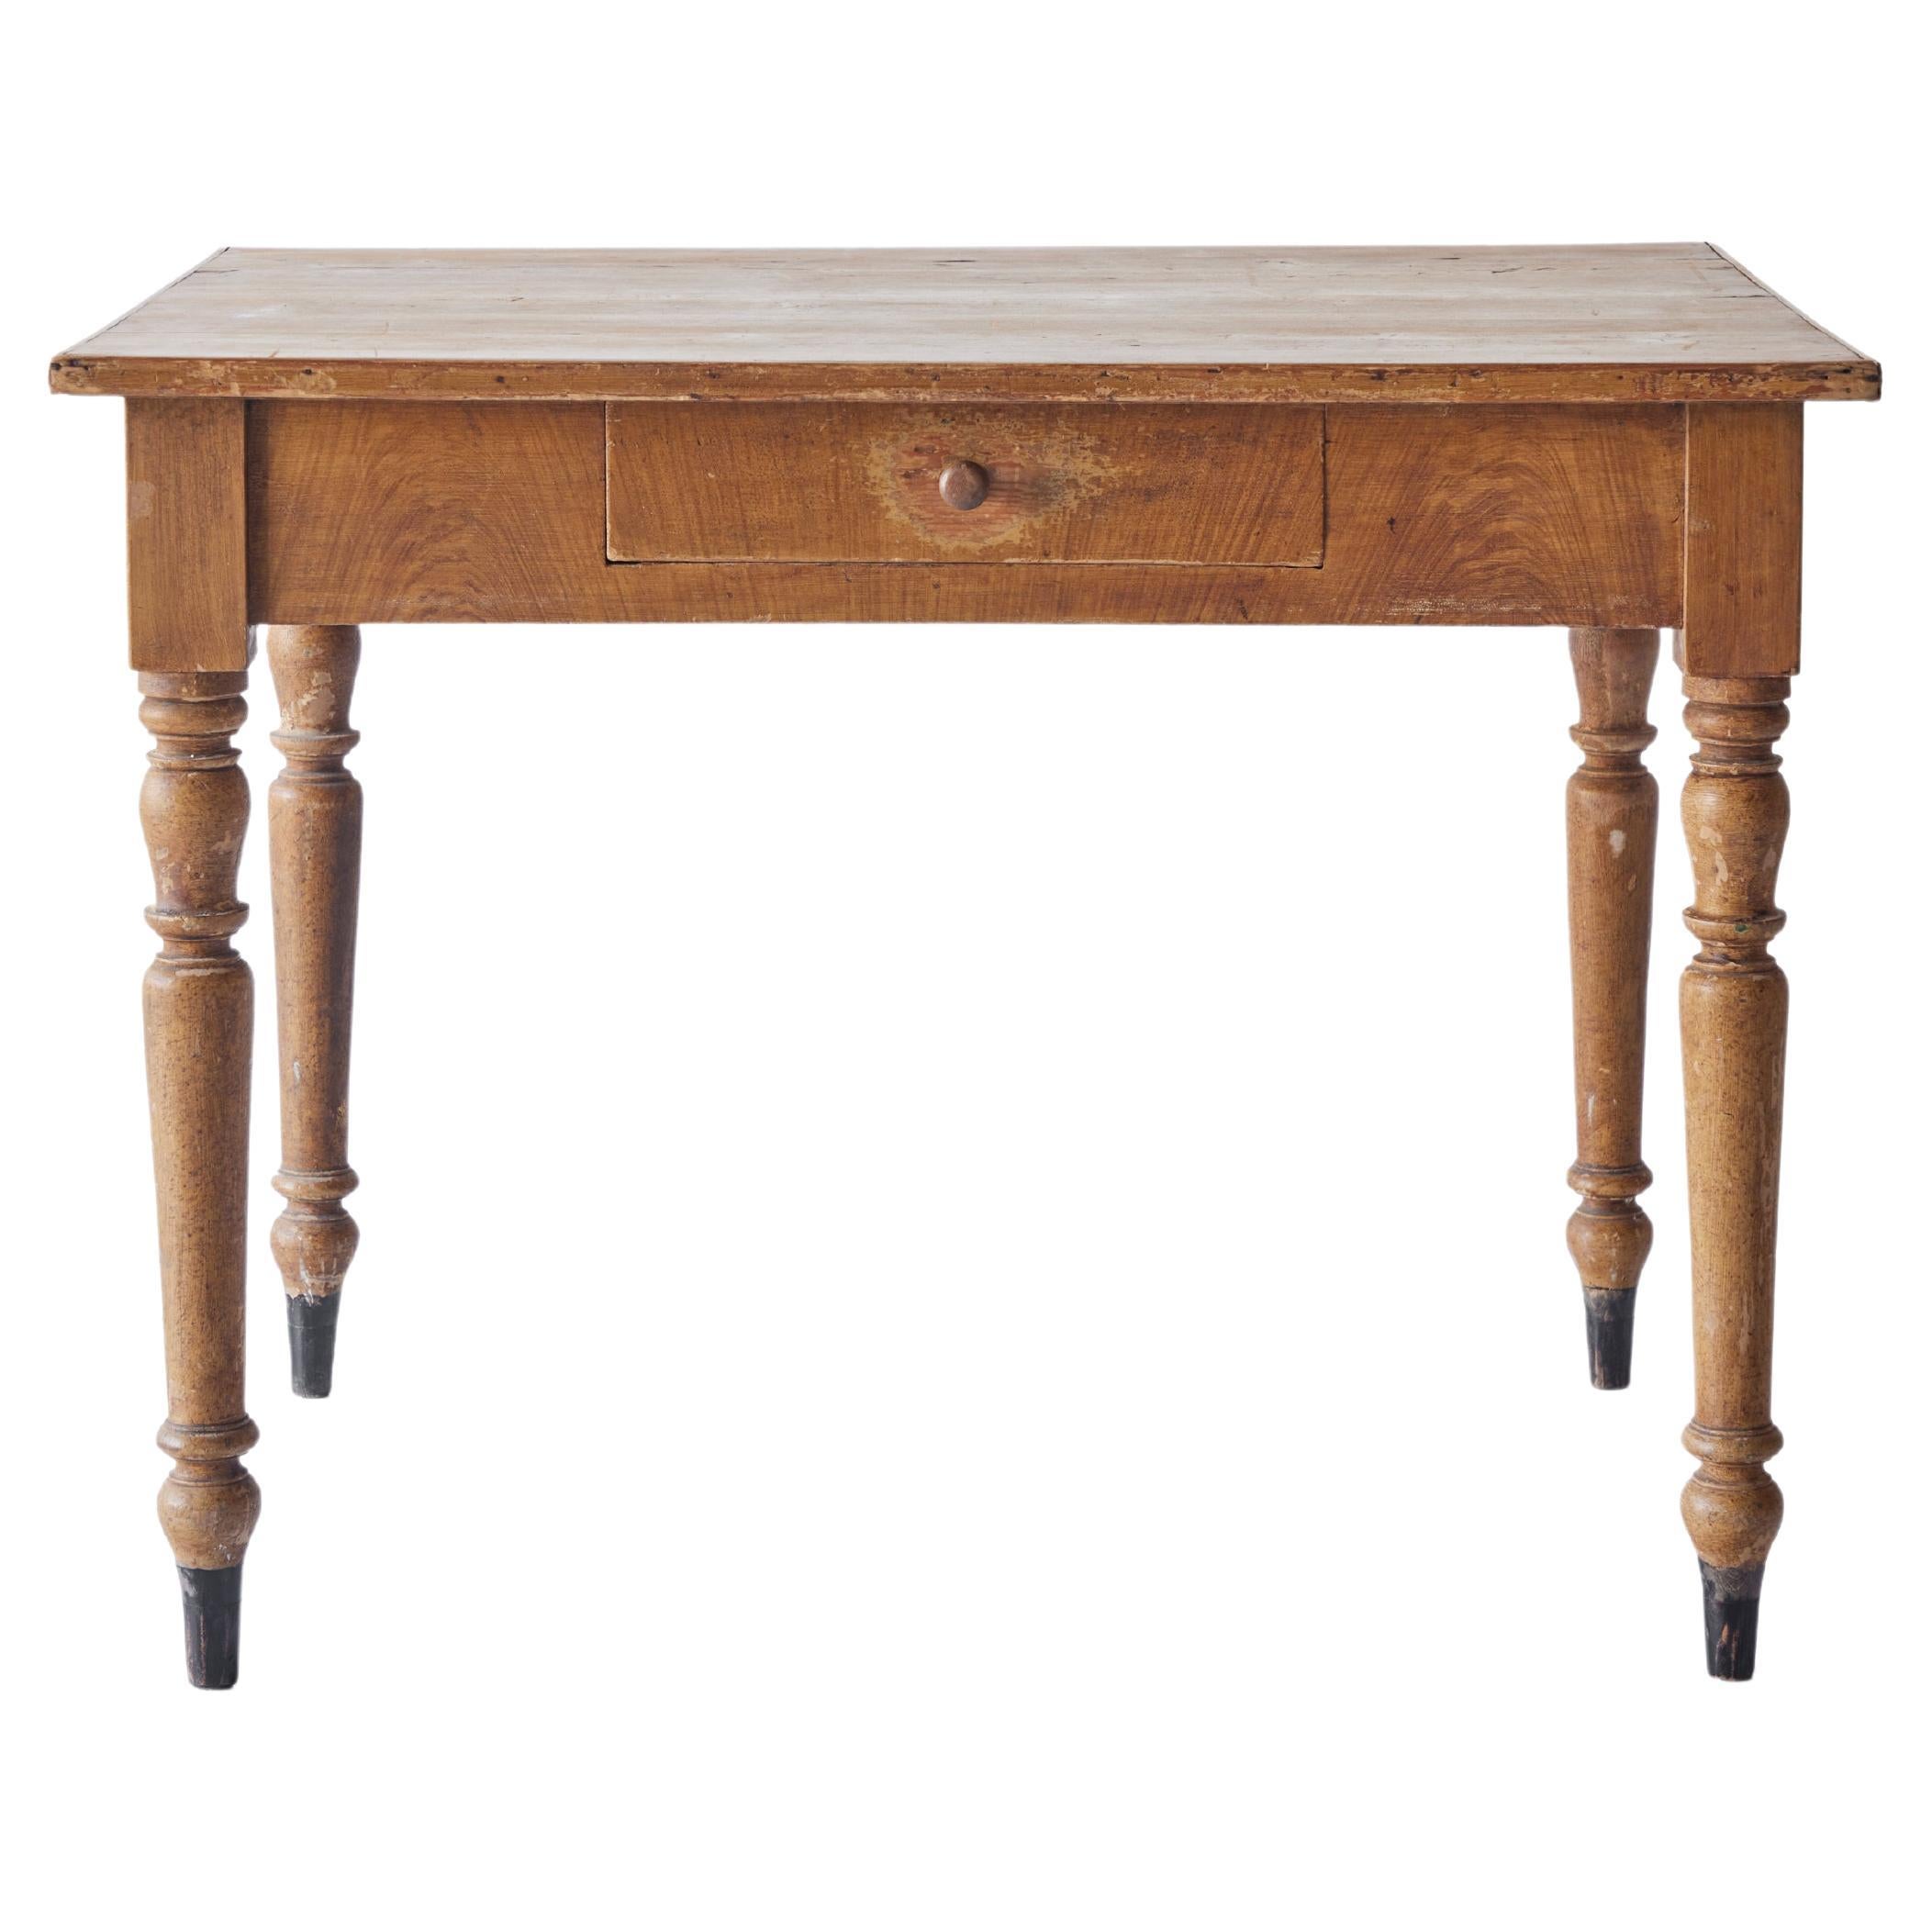 Rustic Early American Table with Single Drawer